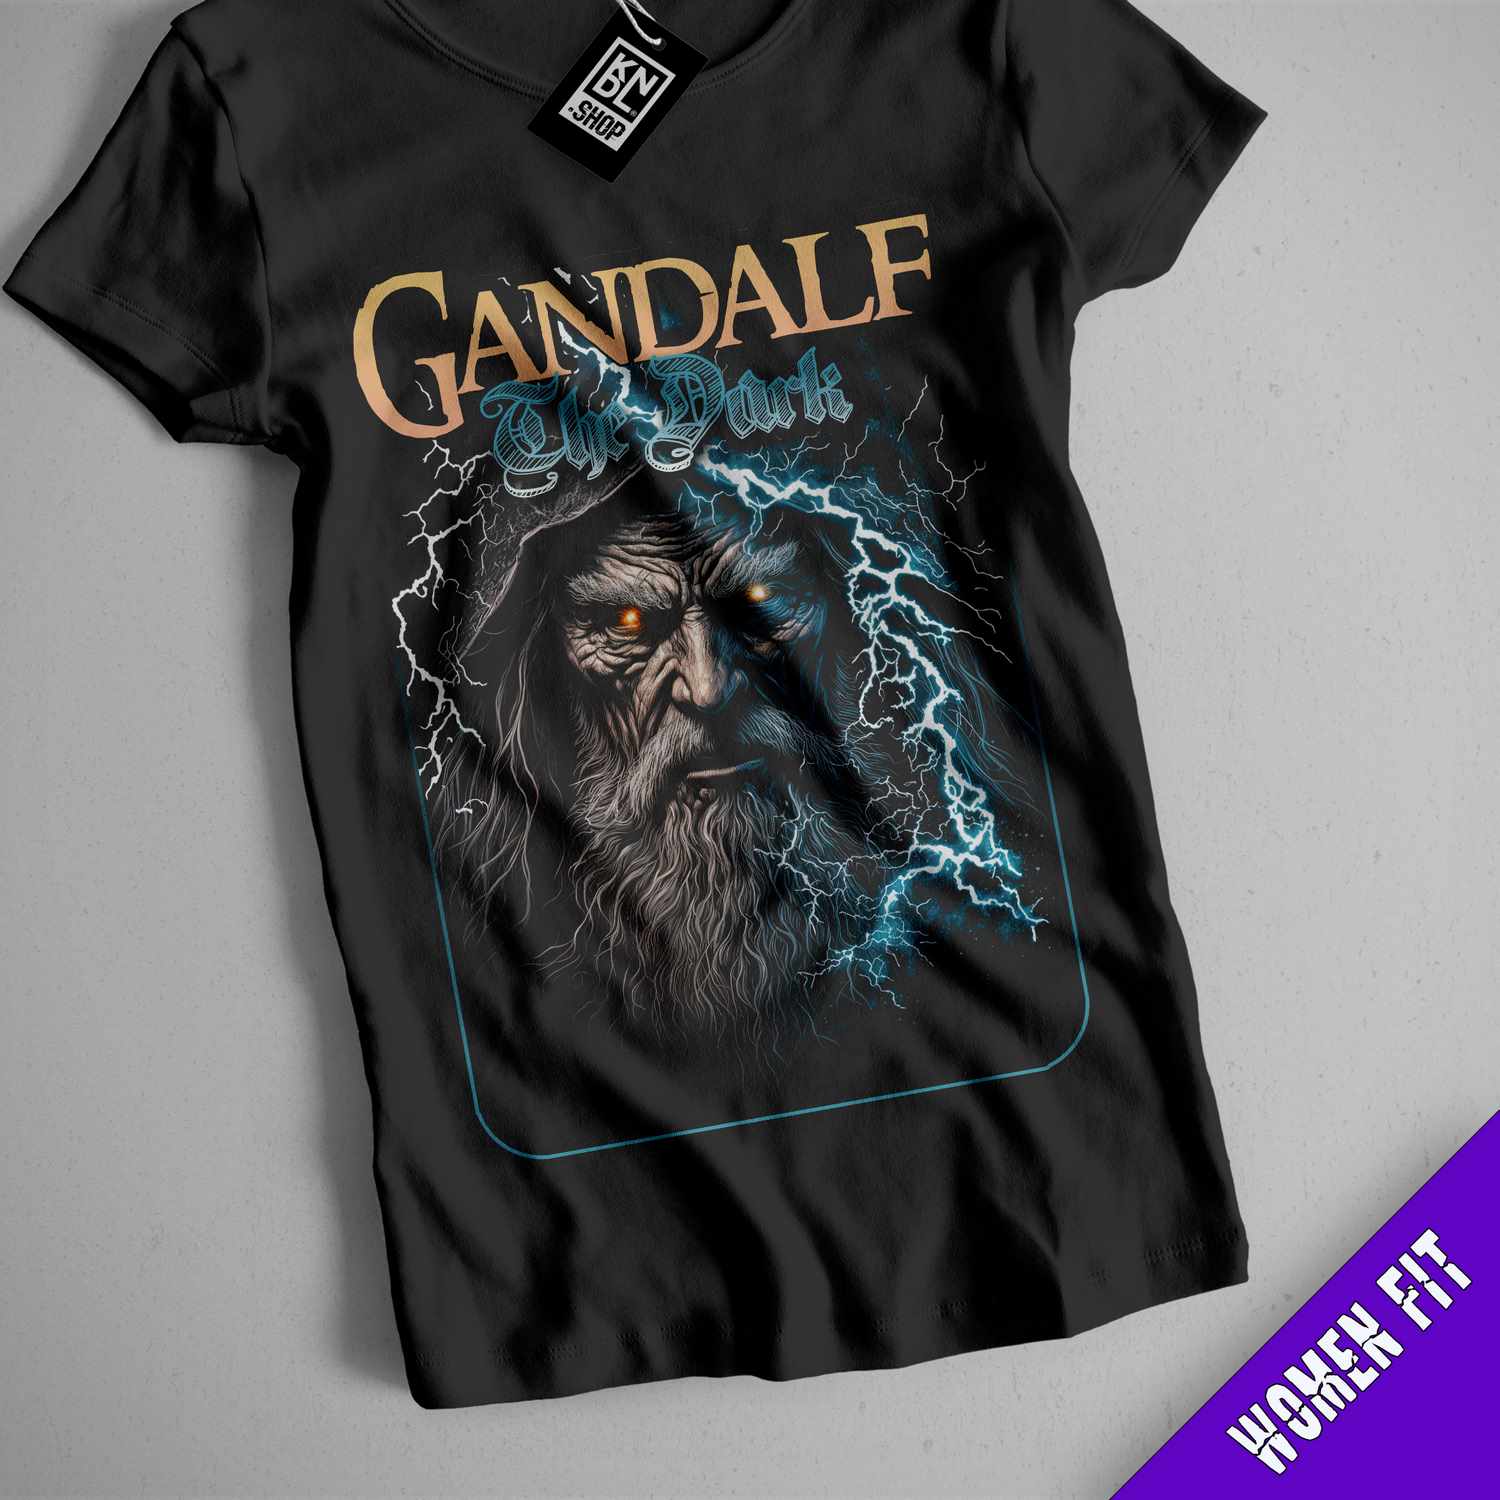 a black t - shirt with a picture of gandale on it